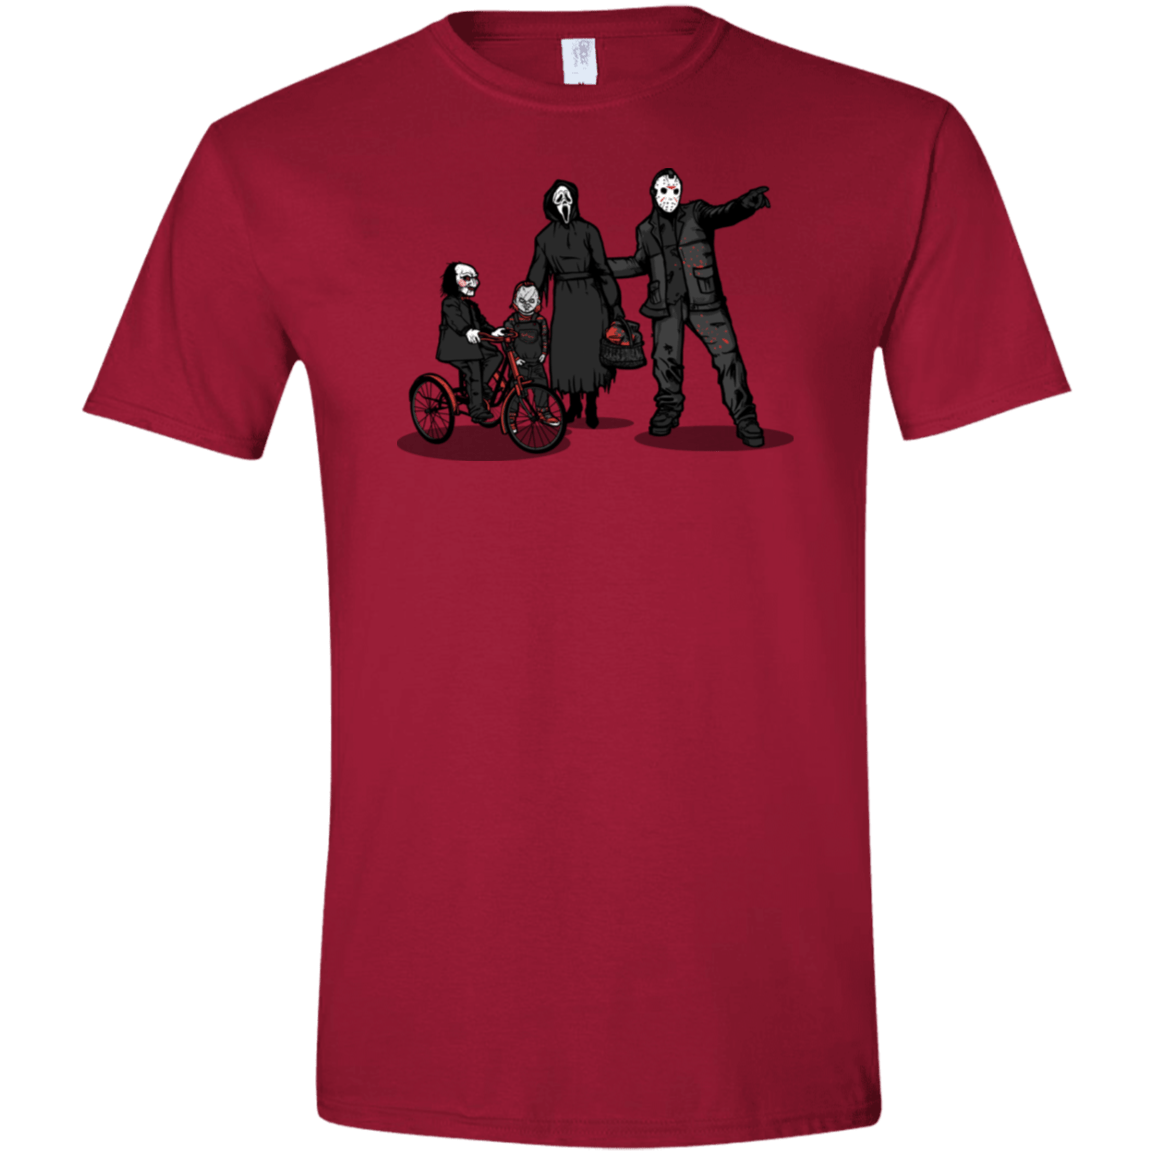 T-Shirts Cardinal Red / S Family Values Men's Semi-Fitted Softstyle